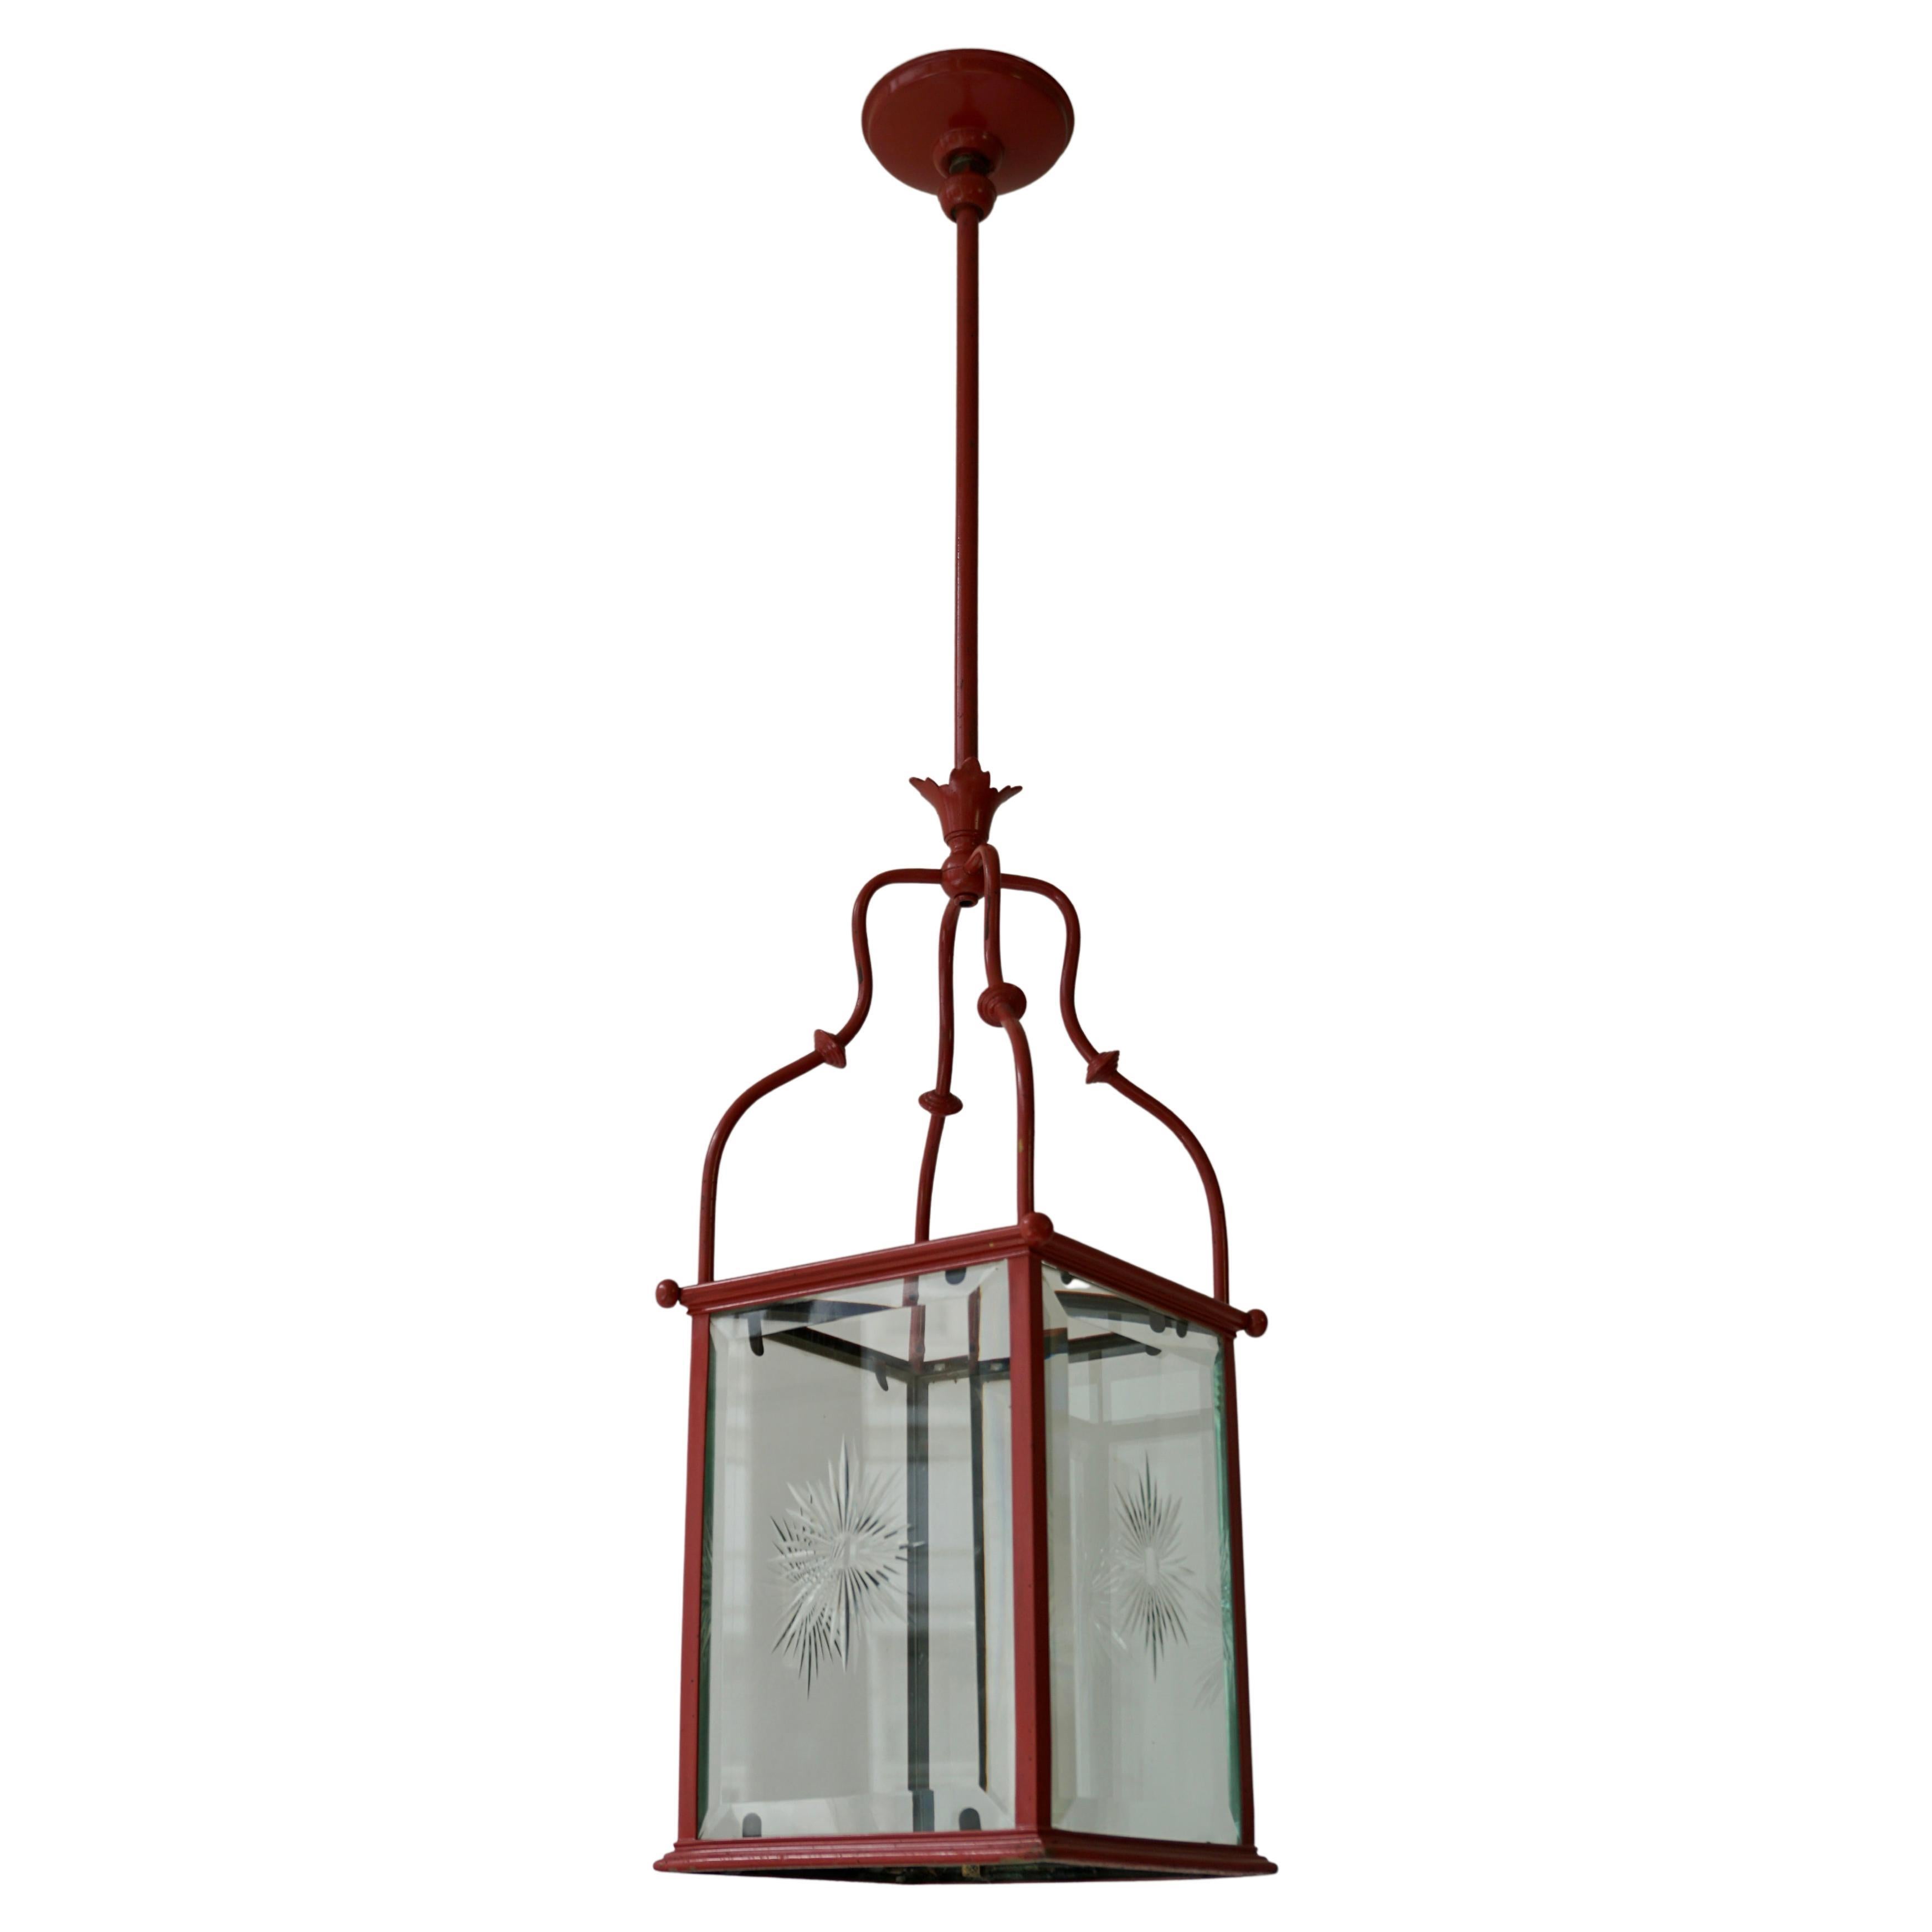 An Italian Red Tole Metal Lantern with Cut Glass, Early 20th C. For Sale